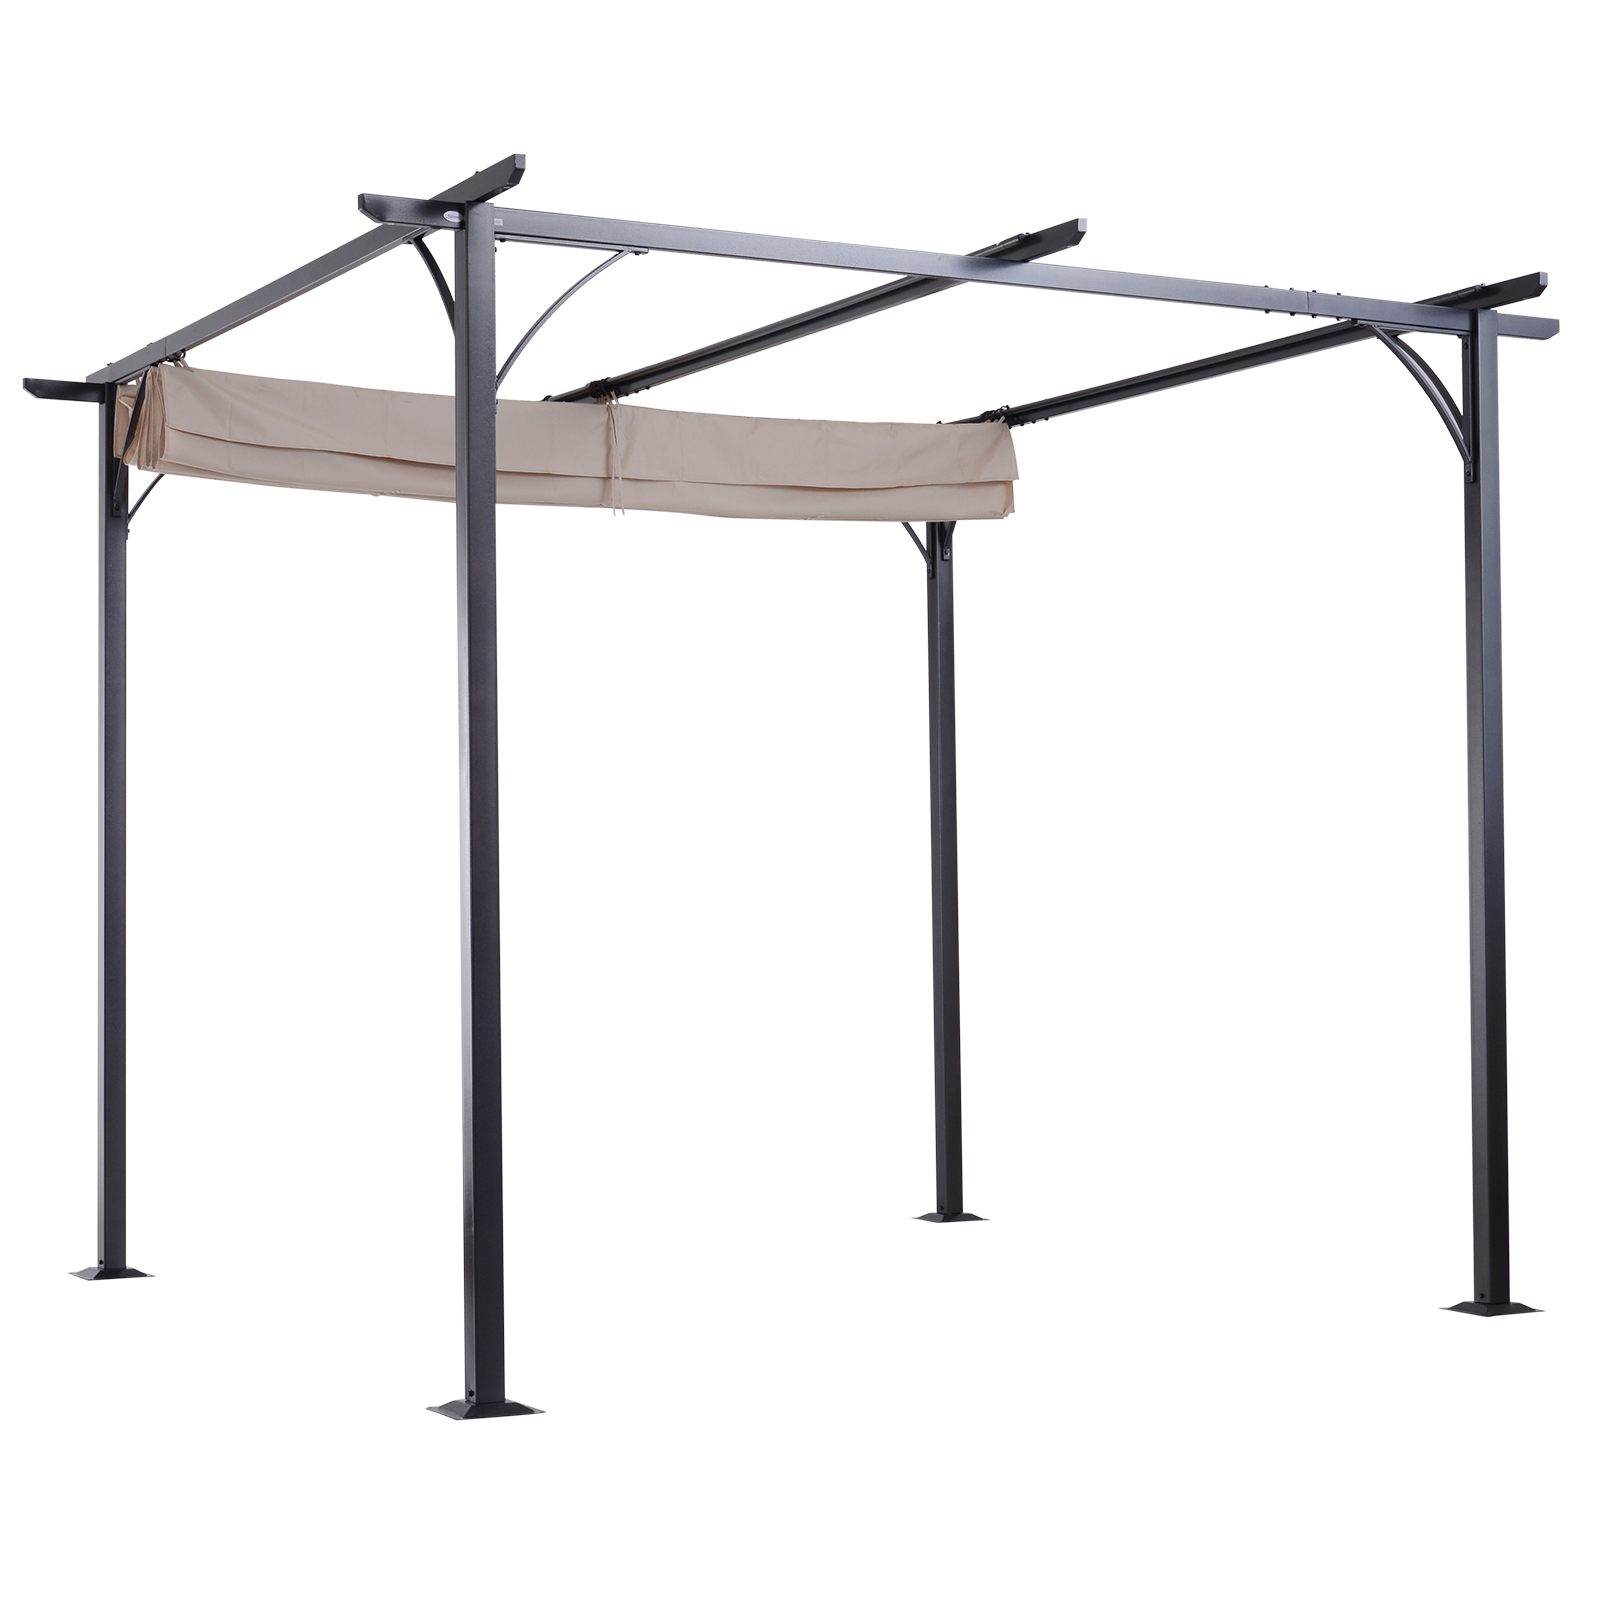 Outsunny 10' x 10' x 7.5' Beige and Black Polyester and Steel Pergola - image 5 of 10